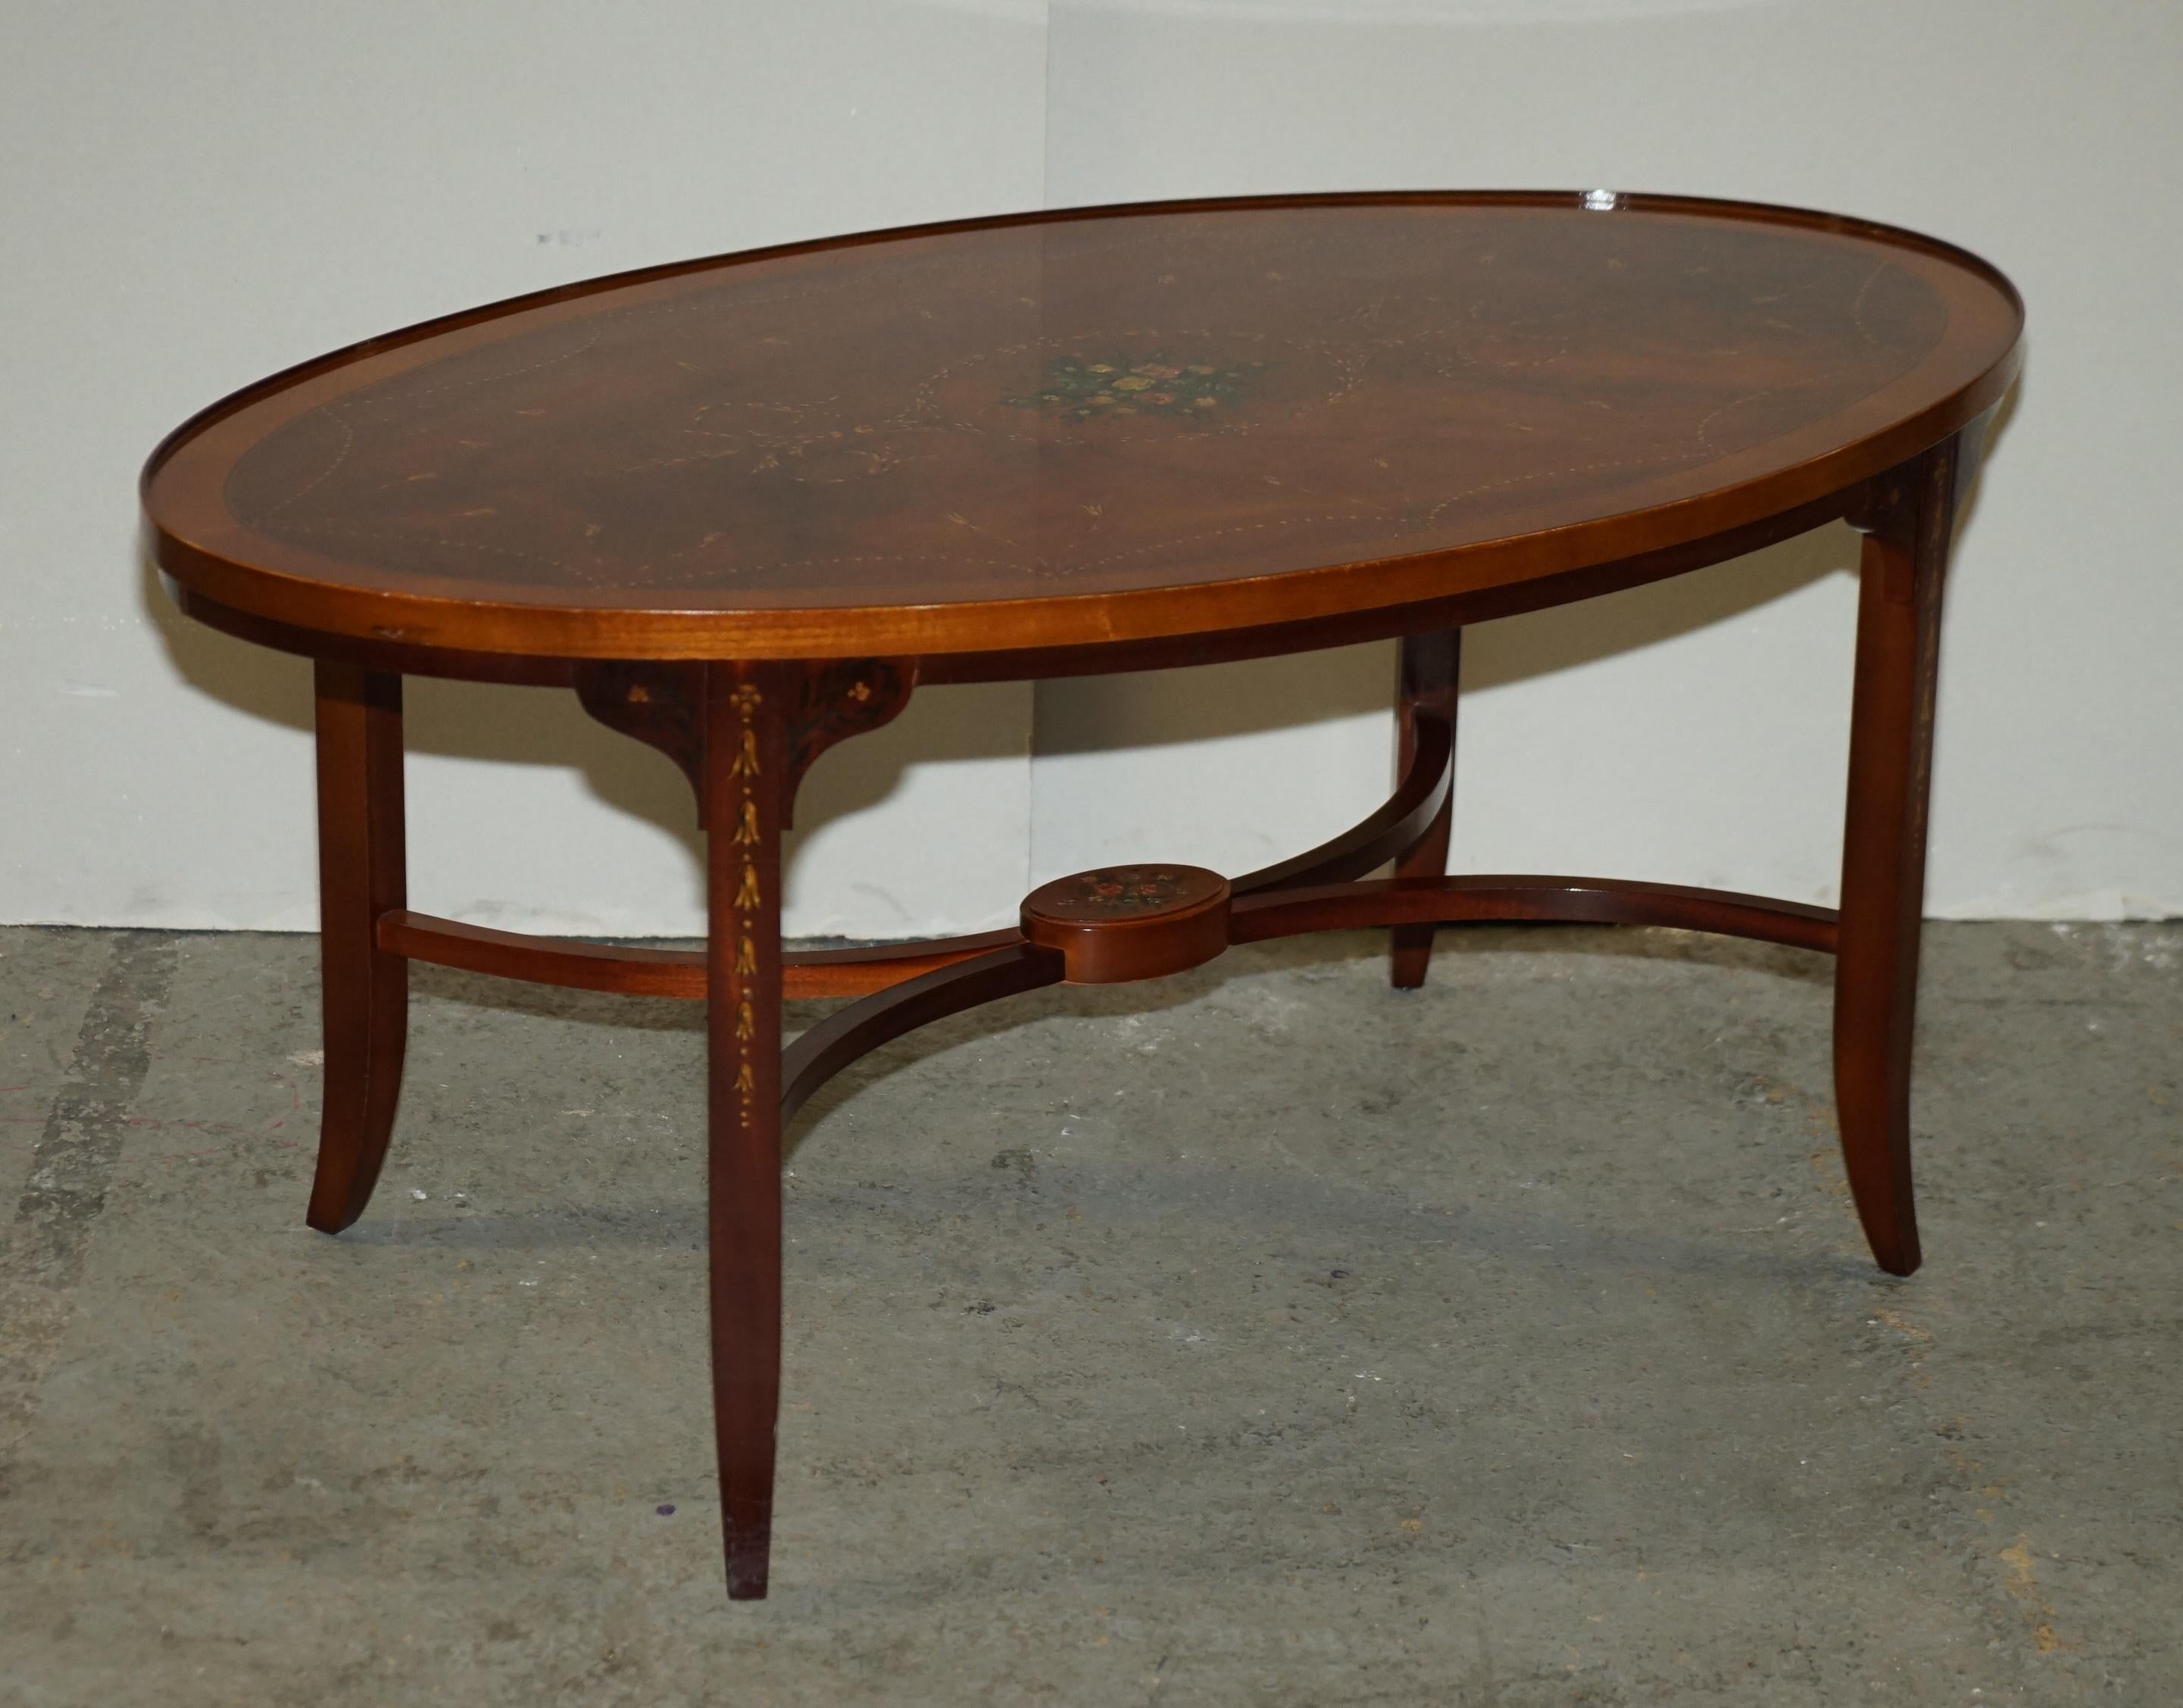 Here we have for sale a lovely oval mahogany and inlaid coffee table with splayed legs united by stretchers.

This table is hand-painted in a stunning floral design with Sheraton-style detailing.

Overall, the table is in good condition it has